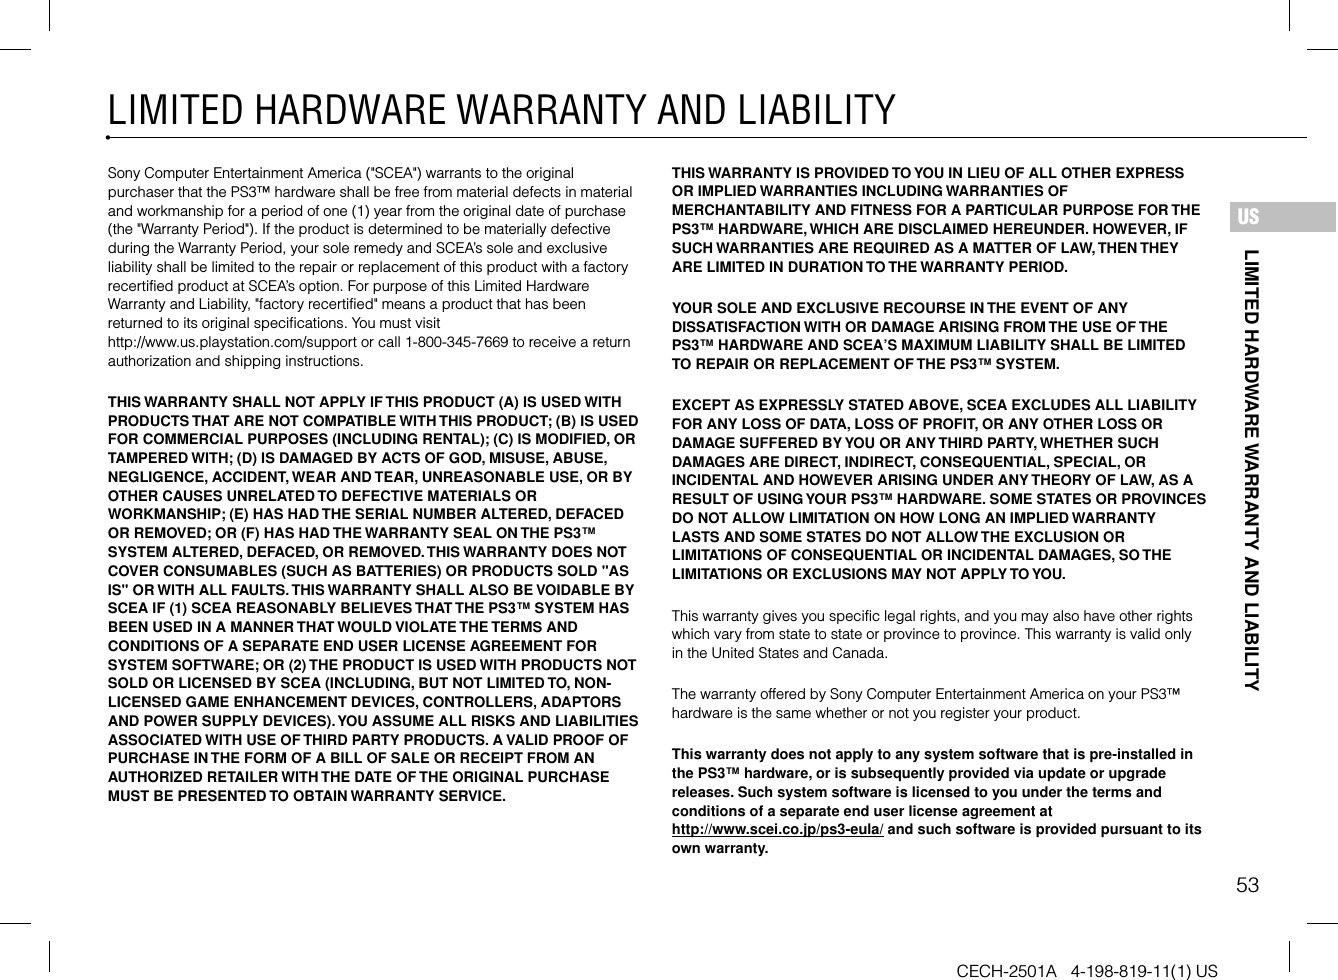 53LIMITED HARDWARE WARRANTY AND LIABILITYCECH-2501A   4-198-819-11(1) USLIMITED HARDWARE WARRANTY AND LIABILITYUSSony Computer Entertainment America (&quot;SCEA&quot;) warrants to the original purchaser that the PS3™ hardware shall be free from material defects in material and workmanship for a period of one (1) year from the original date of purchase (the &quot;Warranty Period&quot;). If the product is determined to be materially defective during the Warranty Period, your sole remedy and SCEA’s sole and exclusive liability shall be limited to the repair or replacement of this product with a factory recertified product at SCEA’s option. For purpose of this Limited Hardware Warranty and Liability, &quot;factory recertified&quot; means a product that has been returned to its original specifications. You must visit http://www.us.playstation.com/support or call 1-800-345-7669 to receive a return authorization and shipping instructions.THIS WARRANTY SHALL NOT APPLY IF THIS PRODUCT (A) IS USED WITH PRODUCTS THAT ARE NOT COMPATIBLE WITH THIS PRODUCT; (B) IS USED FOR COMMERCIAL PURPOSES (INCLUDING RENTAL); (C) IS MODIFIED, OR TAMPERED WITH; (D) IS DAMAGED BY ACTS OF GOD, MISUSE, ABUSE, NEGLIGENCE, ACCIDENT, WEAR AND TEAR, UNREASONABLE USE, OR BY OTHER CAUSES UNRELATED TO DEFECTIVE MATERIALS OR WORKMANSHIP; (E) HAS HAD THE SERIAL NUMBER ALTERED, DEFACED OR REMOVED; OR (F) HAS HAD THE WARRANTY SEAL ON THE PS3™ SYSTEM ALTERED, DEFACED, OR REMOVED. THIS WARRANTY DOES NOT COVER CONSUMABLES (SUCH AS BATTERIES) OR PRODUCTS SOLD &quot;AS IS&quot; OR WITH ALL FAULTS. THIS WARRANTY SHALL ALSO BE VOIDABLE BY SCEA IF (1) SCEA REASONABLY BELIEVES THAT THE PS3™ SYSTEM HAS BEEN USED IN A MANNER THAT WOULD VIOLATE THE TERMS AND CONDITIONS OF A SEPARATE END USER LICENSE AGREEMENT FOR SYSTEM SOFTWARE; OR (2) THE PRODUCT IS USED WITH PRODUCTS NOT SOLD OR LICENSED BY SCEA (INCLUDING, BUT NOT LIMITED TO, NON-LICENSED GAME ENHANCEMENT DEVICES, CONTROLLERS, ADAPTORS AND POWER SUPPLY DEVICES). YOU ASSUME ALL RISKS AND LIABILITIES ASSOCIATED WITH USE OF THIRD PARTY PRODUCTS. A VALID PROOF OF PURCHASE IN THE FORM OF A BILL OF SALE OR RECEIPT FROM AN AUTHORIZED RETAILER WITH THE DATE OF THE ORIGINAL PURCHASE MUST BE PRESENTED TO OBTAIN WARRANTY SERVICE.THIS WARRANTY IS PROVIDED TO YOU IN LIEU OF ALL OTHER EXPRESS OR IMPLIED WARRANTIES INCLUDING WARRANTIES OF MERCHANTABILITY AND FITNESS FOR A PARTICULAR PURPOSE FOR THE PS3™ HARDWARE, WHICH ARE DISCLAIMED HEREUNDER. HOWEVER, IF SUCH WARRANTIES ARE REQUIRED AS A MATTER OF LAW, THEN THEY ARE LIMITED IN DURATION TO THE WARRANTY PERIOD. YOUR SOLE AND EXCLUSIVE RECOURSE IN THE EVENT OF ANY DISSATISFACTION WITH OR DAMAGE ARISING FROM THE USE OF THE PS3™ HARDWARE AND SCEA’S MAXIMUM LIABILITY SHALL BE LIMITED TO REPAIR OR REPLACEMENT OF THE PS3™ SYSTEM. EXCEPT AS EXPRESSLY STATED ABOVE, SCEA EXCLUDES ALL LIABILITY FOR ANY LOSS OF DATA, LOSS OF PROFIT, OR ANY OTHER LOSS OR DAMAGE SUFFERED BY YOU OR ANY THIRD PARTY, WHETHER SUCH DAMAGES ARE DIRECT, INDIRECT, CONSEQUENTIAL, SPECIAL, OR INCIDENTAL AND HOWEVER ARISING UNDER ANY THEORY OF LAW, AS A RESULT OF USING YOUR PS3™ HARDWARE. SOME STATES OR PROVINCES DO NOT ALLOW LIMITATION ON HOW LONG AN IMPLIED WARRANTY LASTS AND SOME STATES DO NOT ALLOW THE EXCLUSION OR LIMITATIONS OF CONSEQUENTIAL OR INCIDENTAL DAMAGES, SO THE LIMITATIONS OR EXCLUSIONS MAY NOT APPLY TO YOU.This warranty gives you specific legal rights, and you may also have other rights which vary from state to state or province to province. This warranty is valid only in the United States and Canada. The warranty offered by Sony Computer Entertainment America on your PS3™ hardware is the same whether or not you register your product.This warranty does not apply to any system software that is pre-installed in the PS3™ hardware, or is subsequently provided via update or upgrade releases. Such system software is licensed to you under the terms and conditions of a separate end user license agreement at http://www.scei.co.jp/ps3-eula/ and such software is provided pursuant to its own warranty.